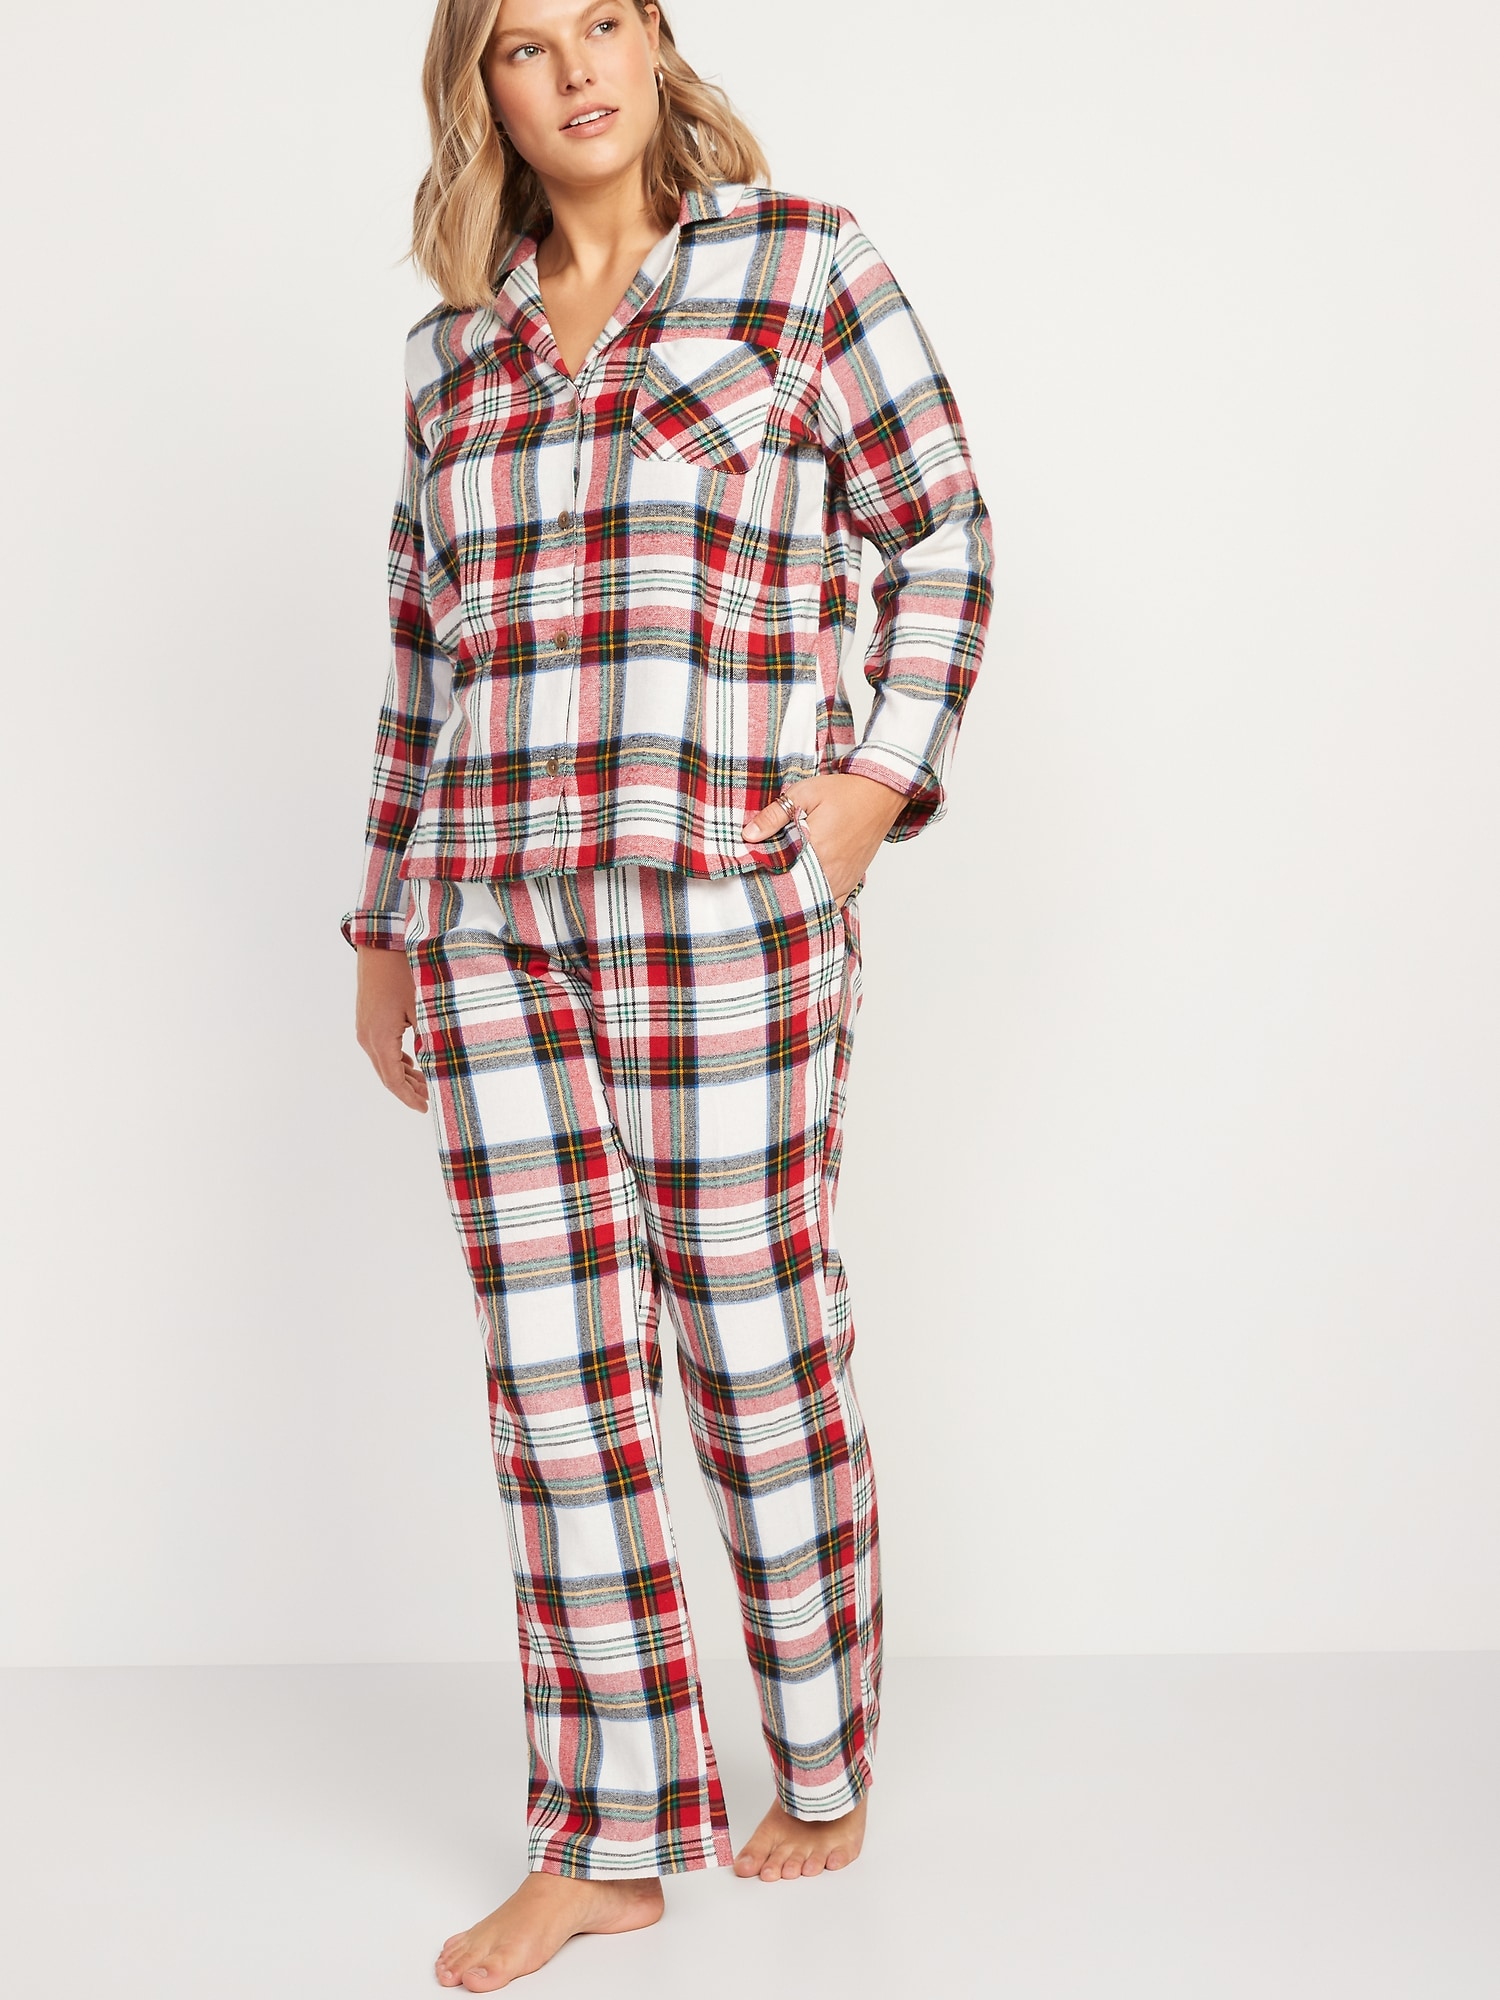 Matching Printed Flannel Pajama Set for Women | Old Navy